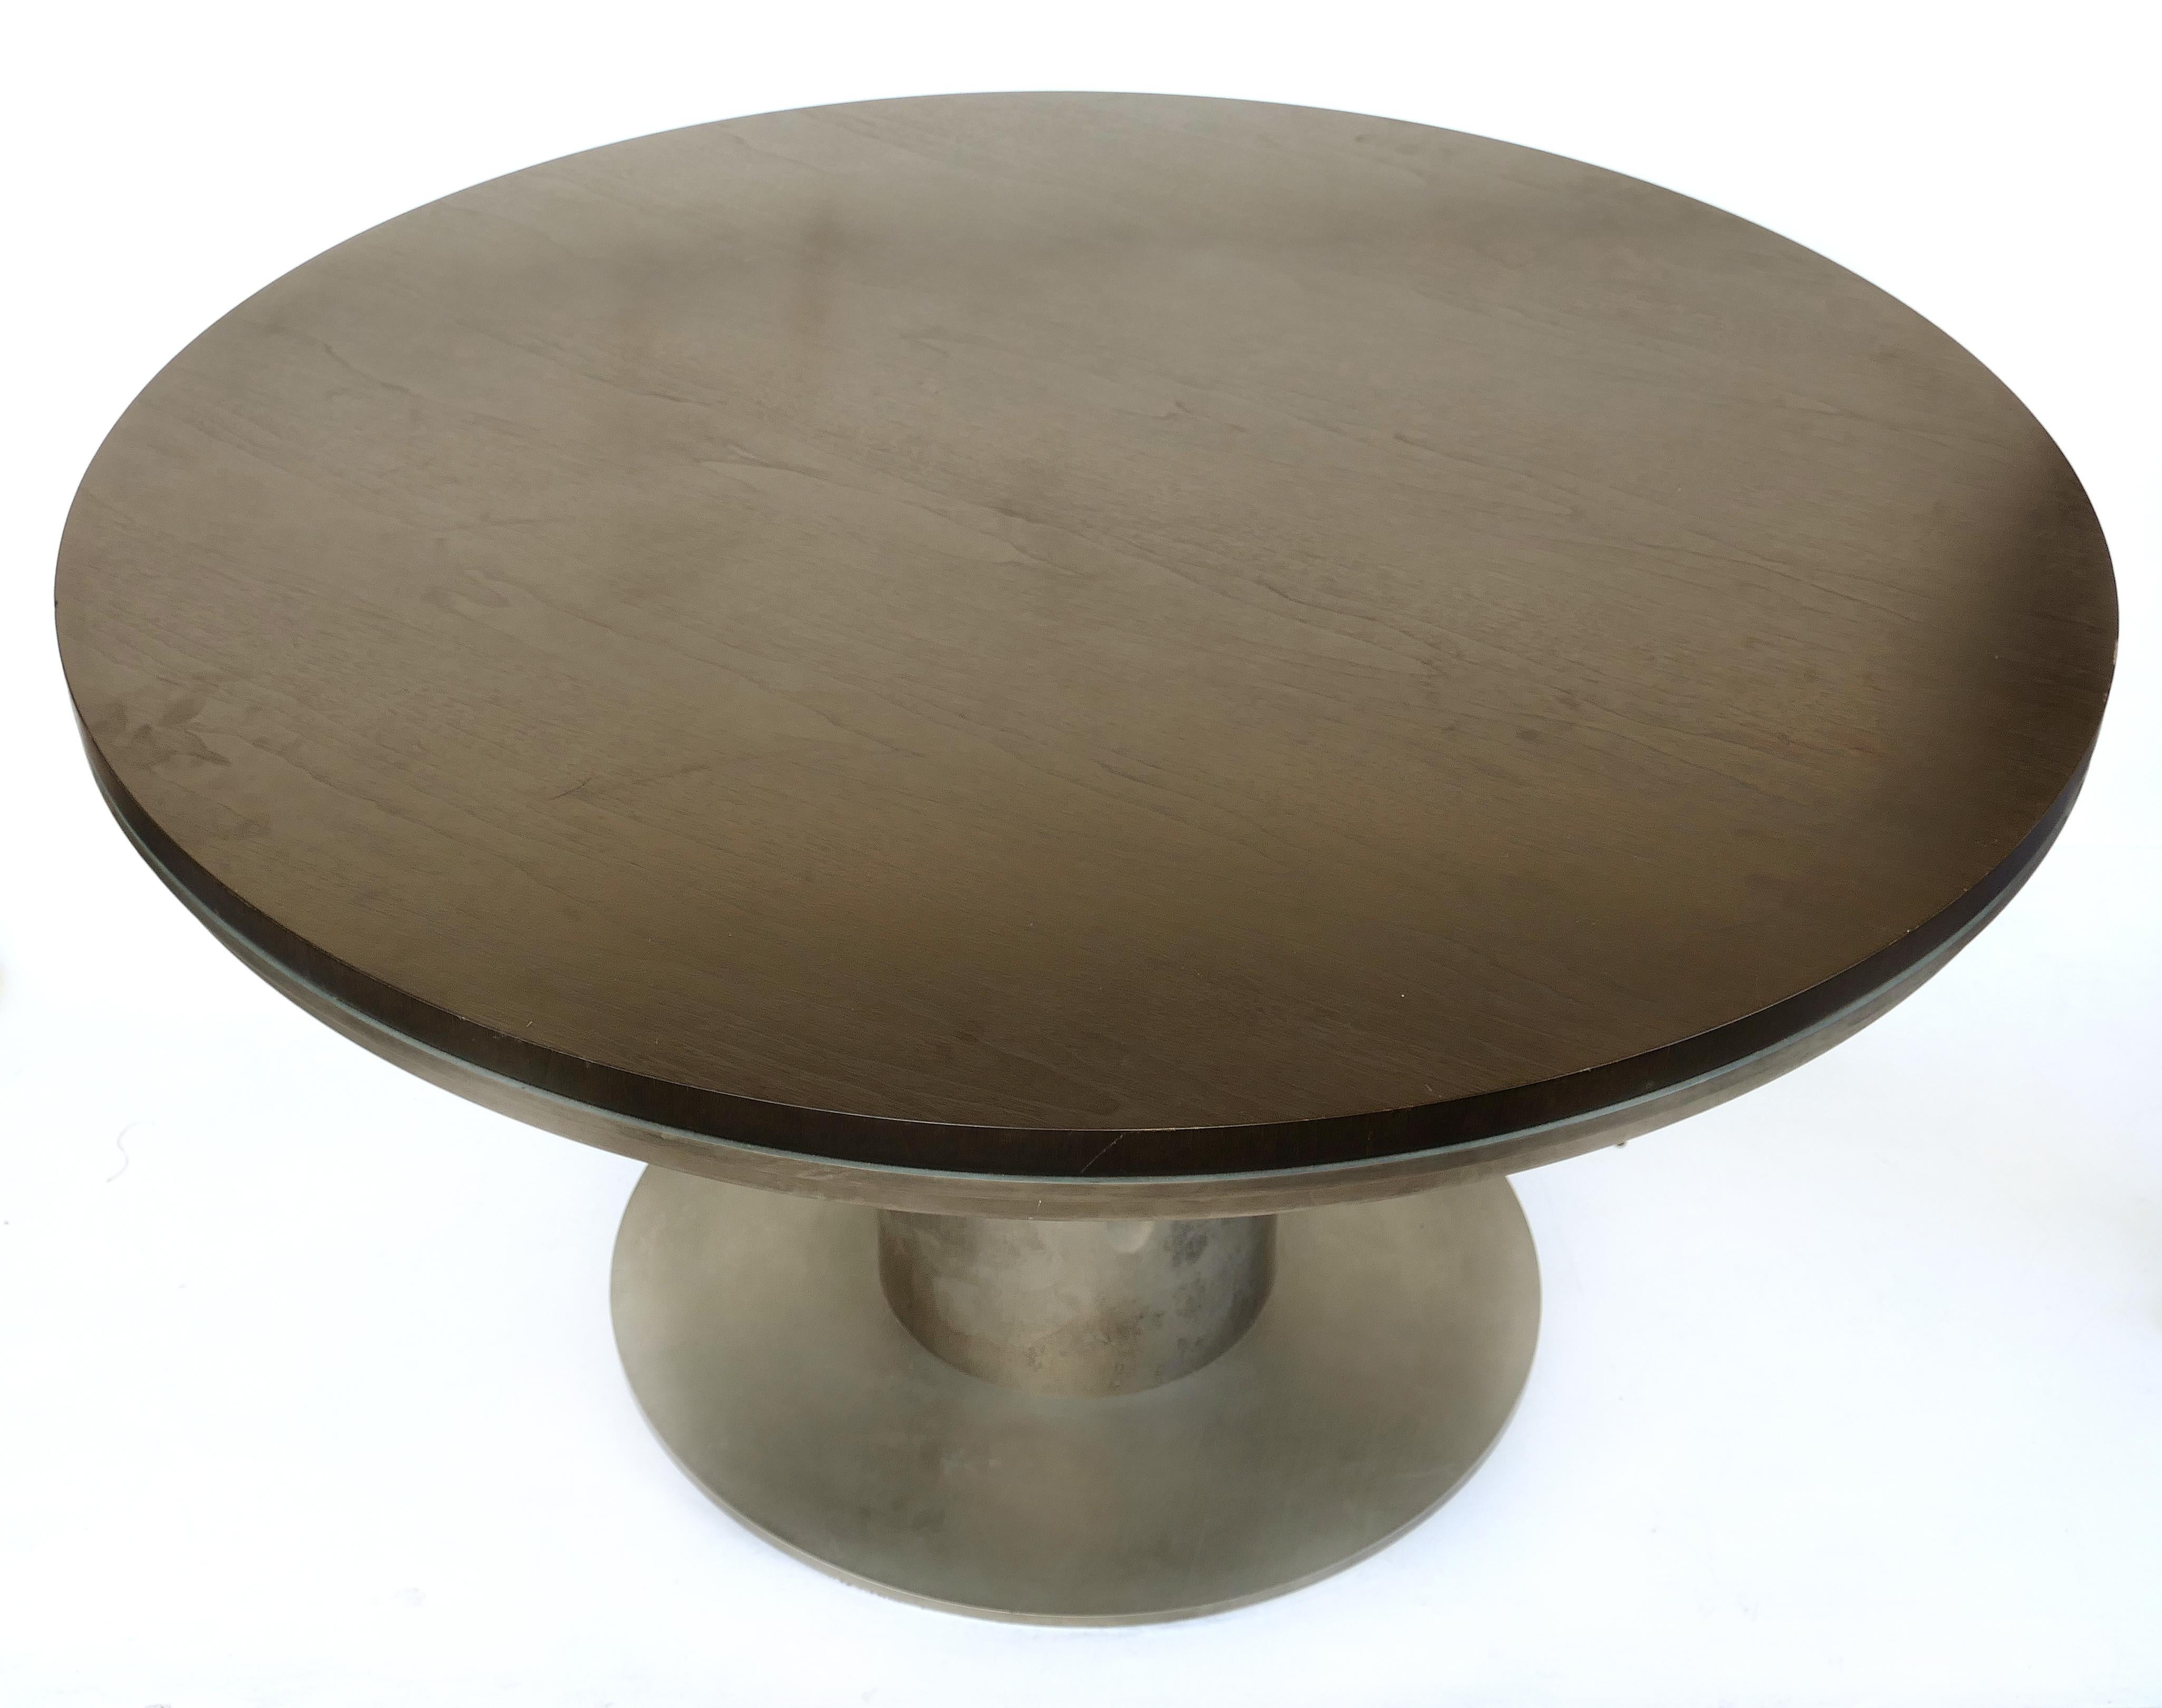 Ebonized wood and steel studio Industrial dining/center table

Offered for sale is an ebonized wood and steel industrial round dining table. This studio creation uses raw industrial materials that still retain the commercial markings on the